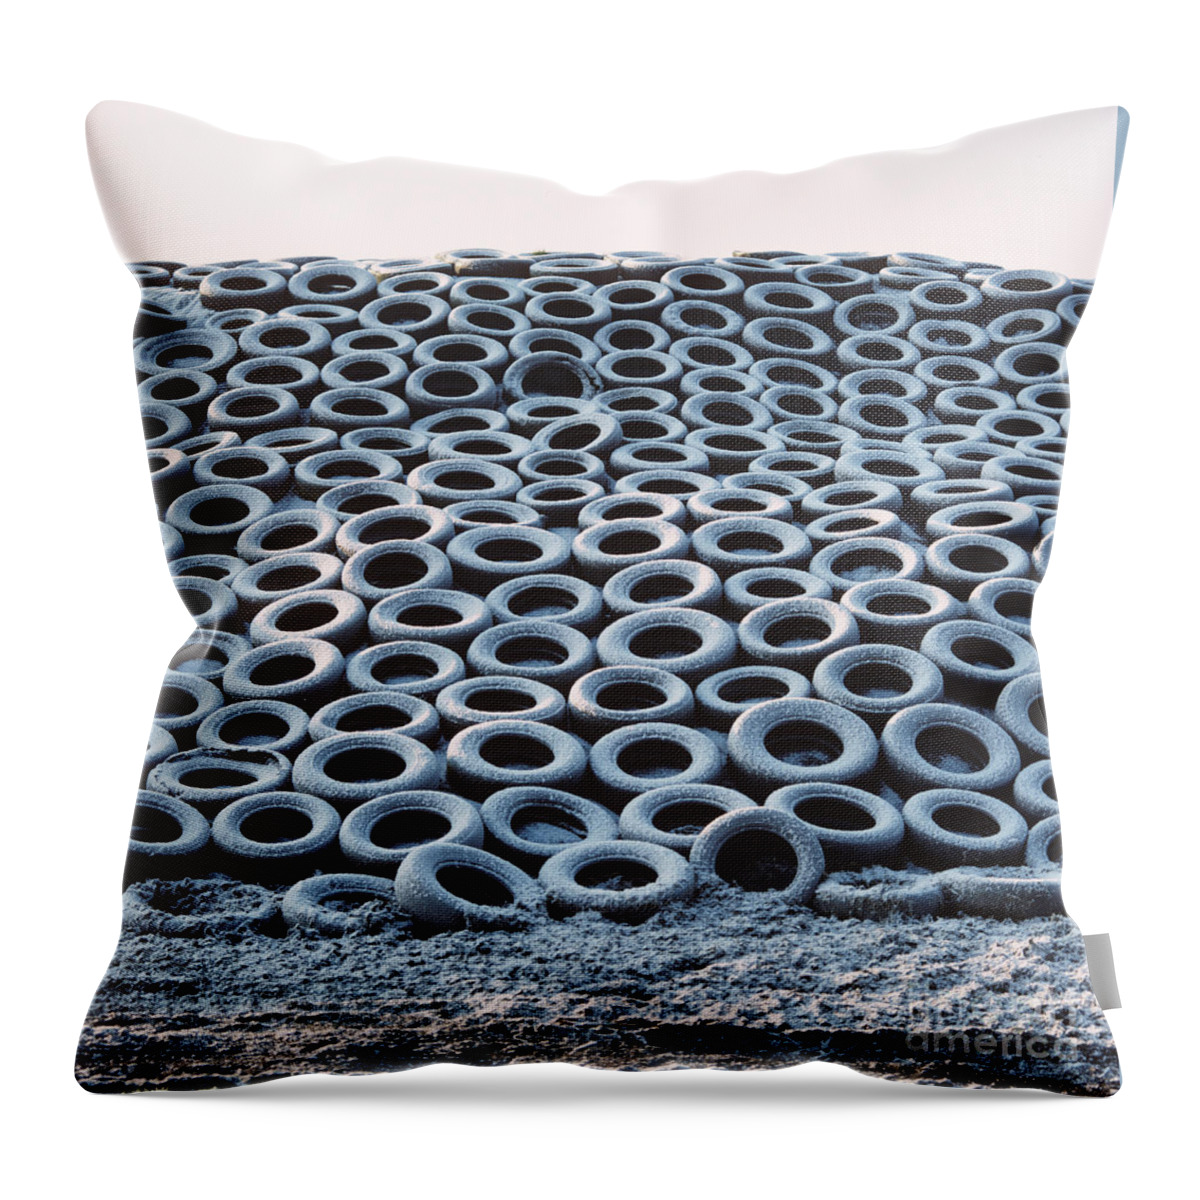 Silage Throw Pillow featuring the photograph Silage Heap With Snow-covered Tires by Nigel Cattlin